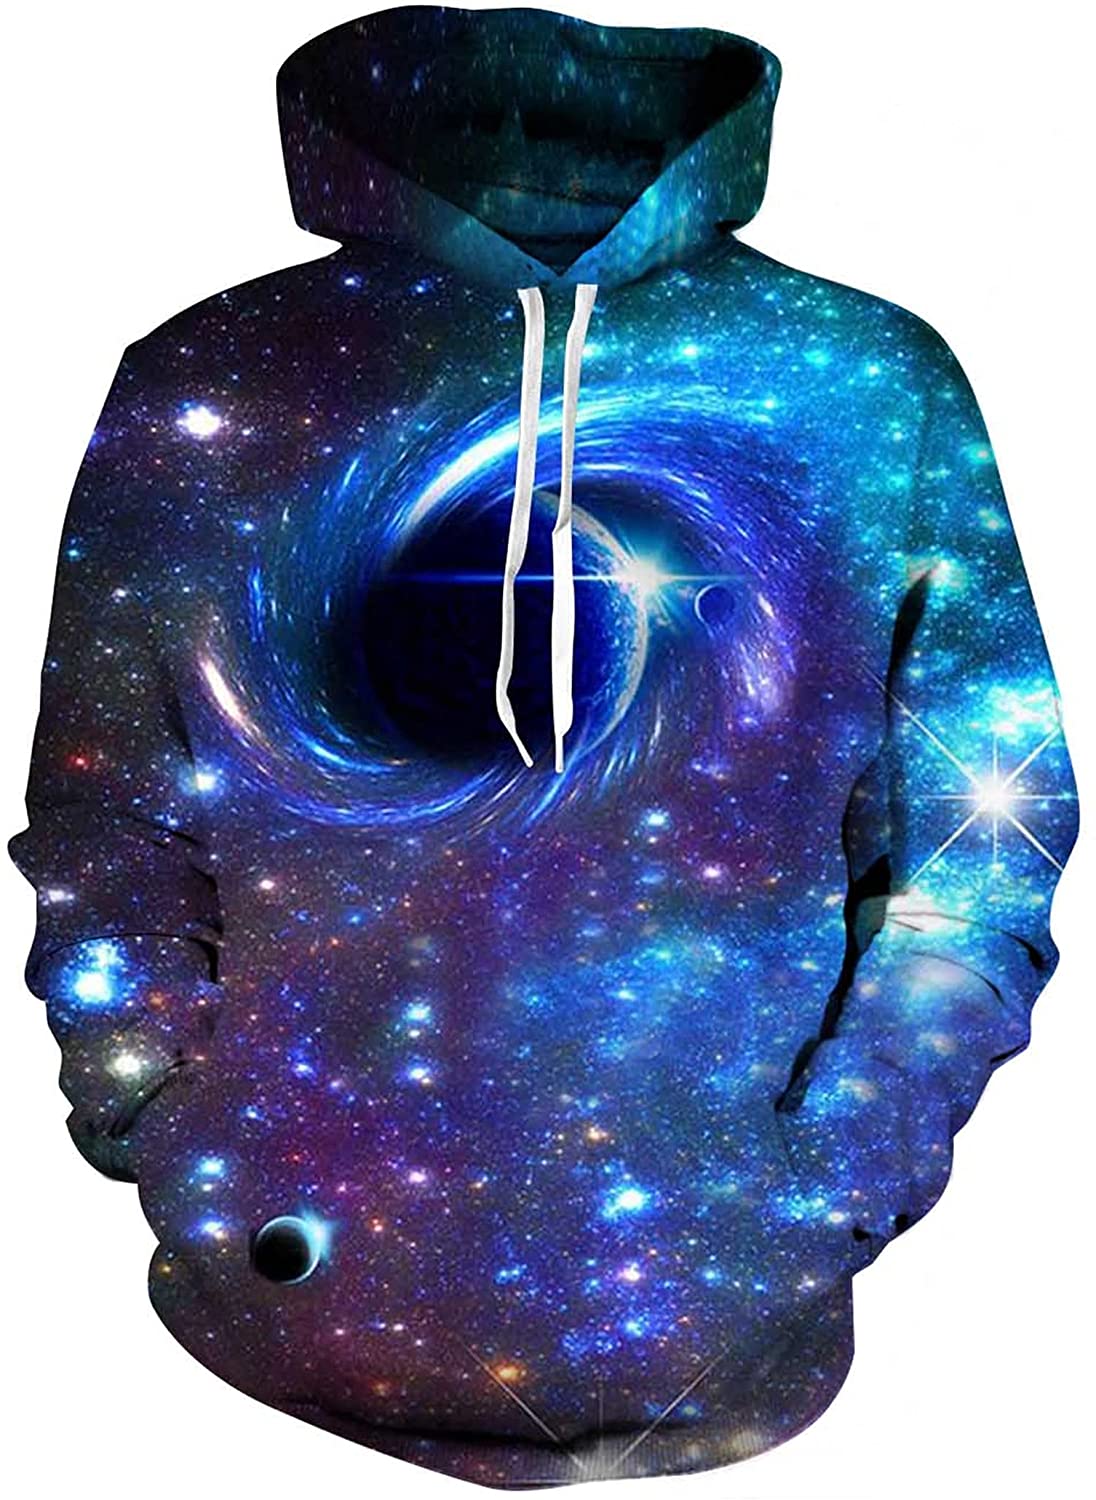 Hgvoetty Unisex 3D Novelty Hoodies for Men Women Cool Graphic Pullover Sweatshirts with Pockets 